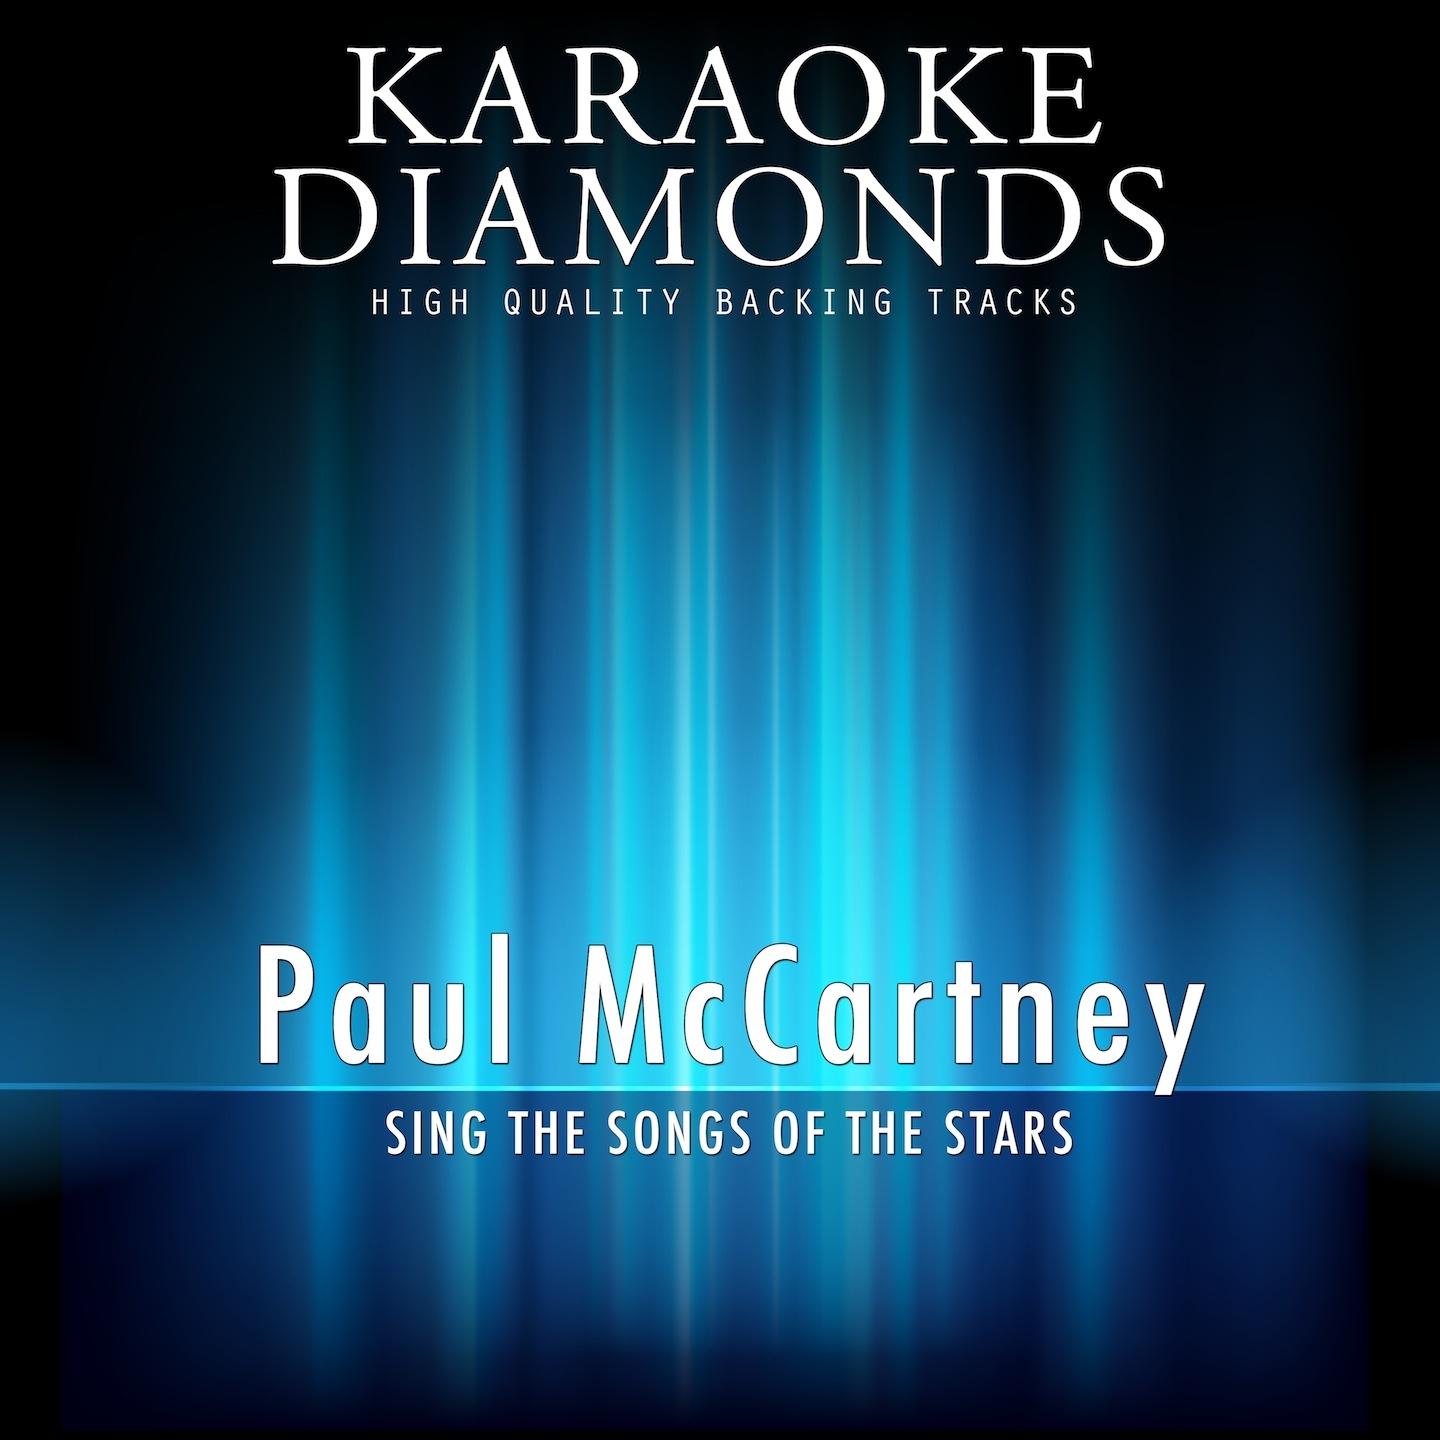 Here, There and Everywhere (Karaoke Version In the Style of Paul McCartney)